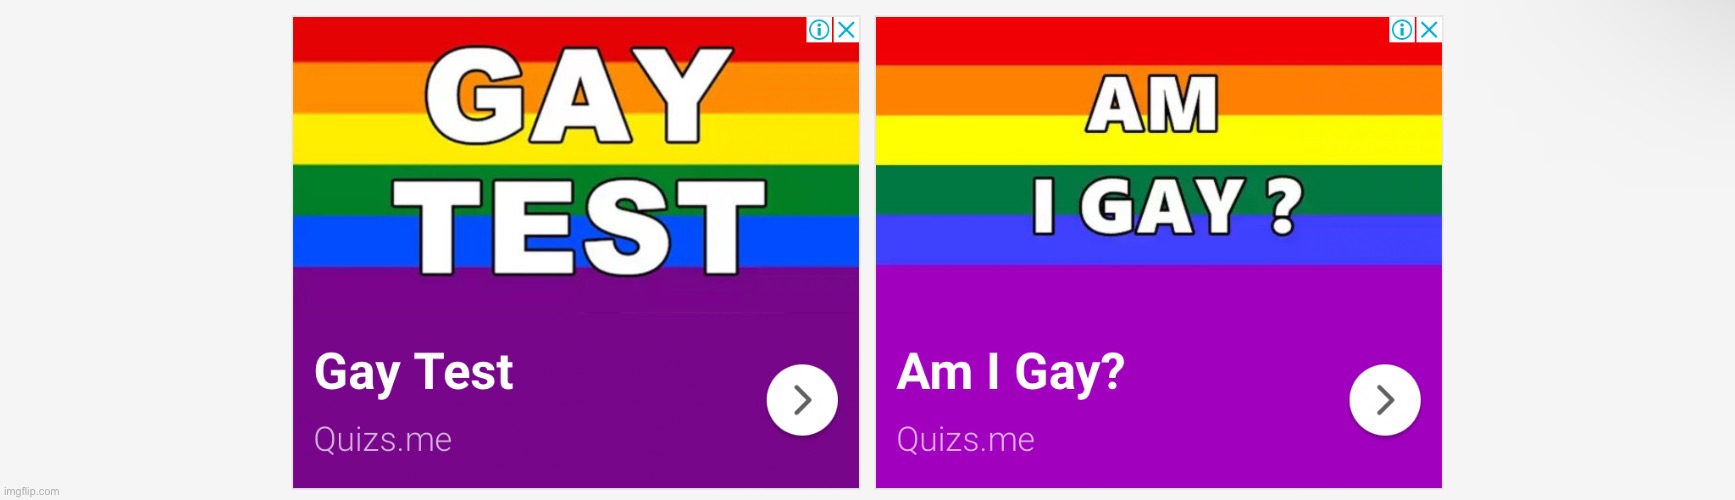 Even though im bisexual, my device sends me ads asking if im gay. | image tagged in bruh | made w/ Imgflip meme maker